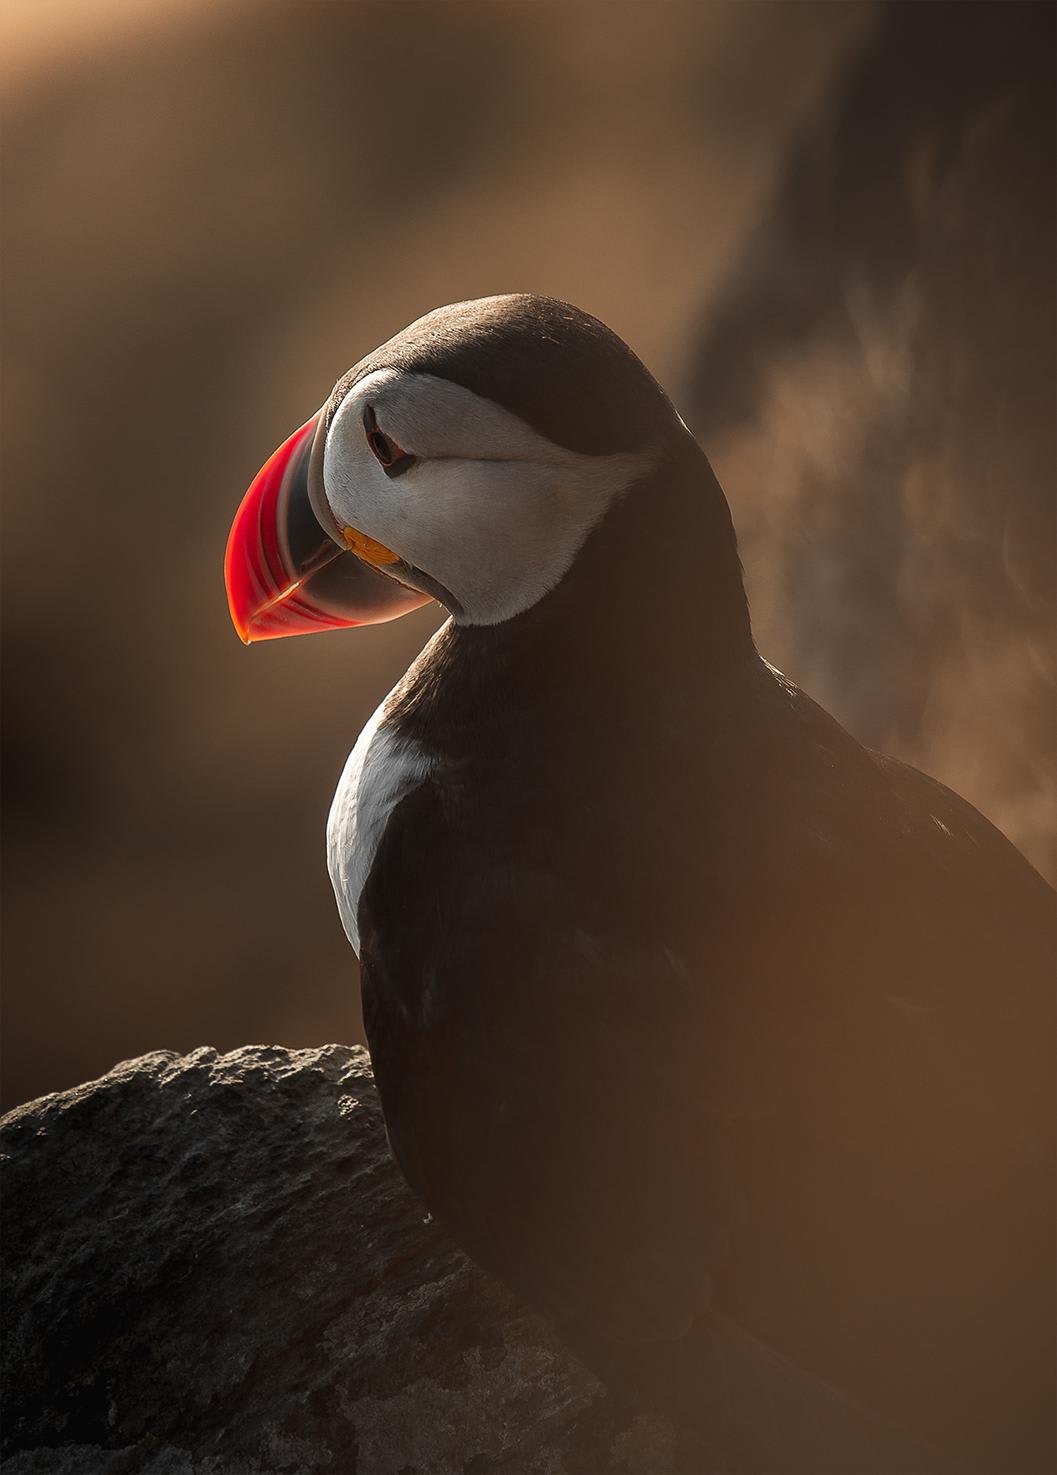 ITAP of a puffin at sunset